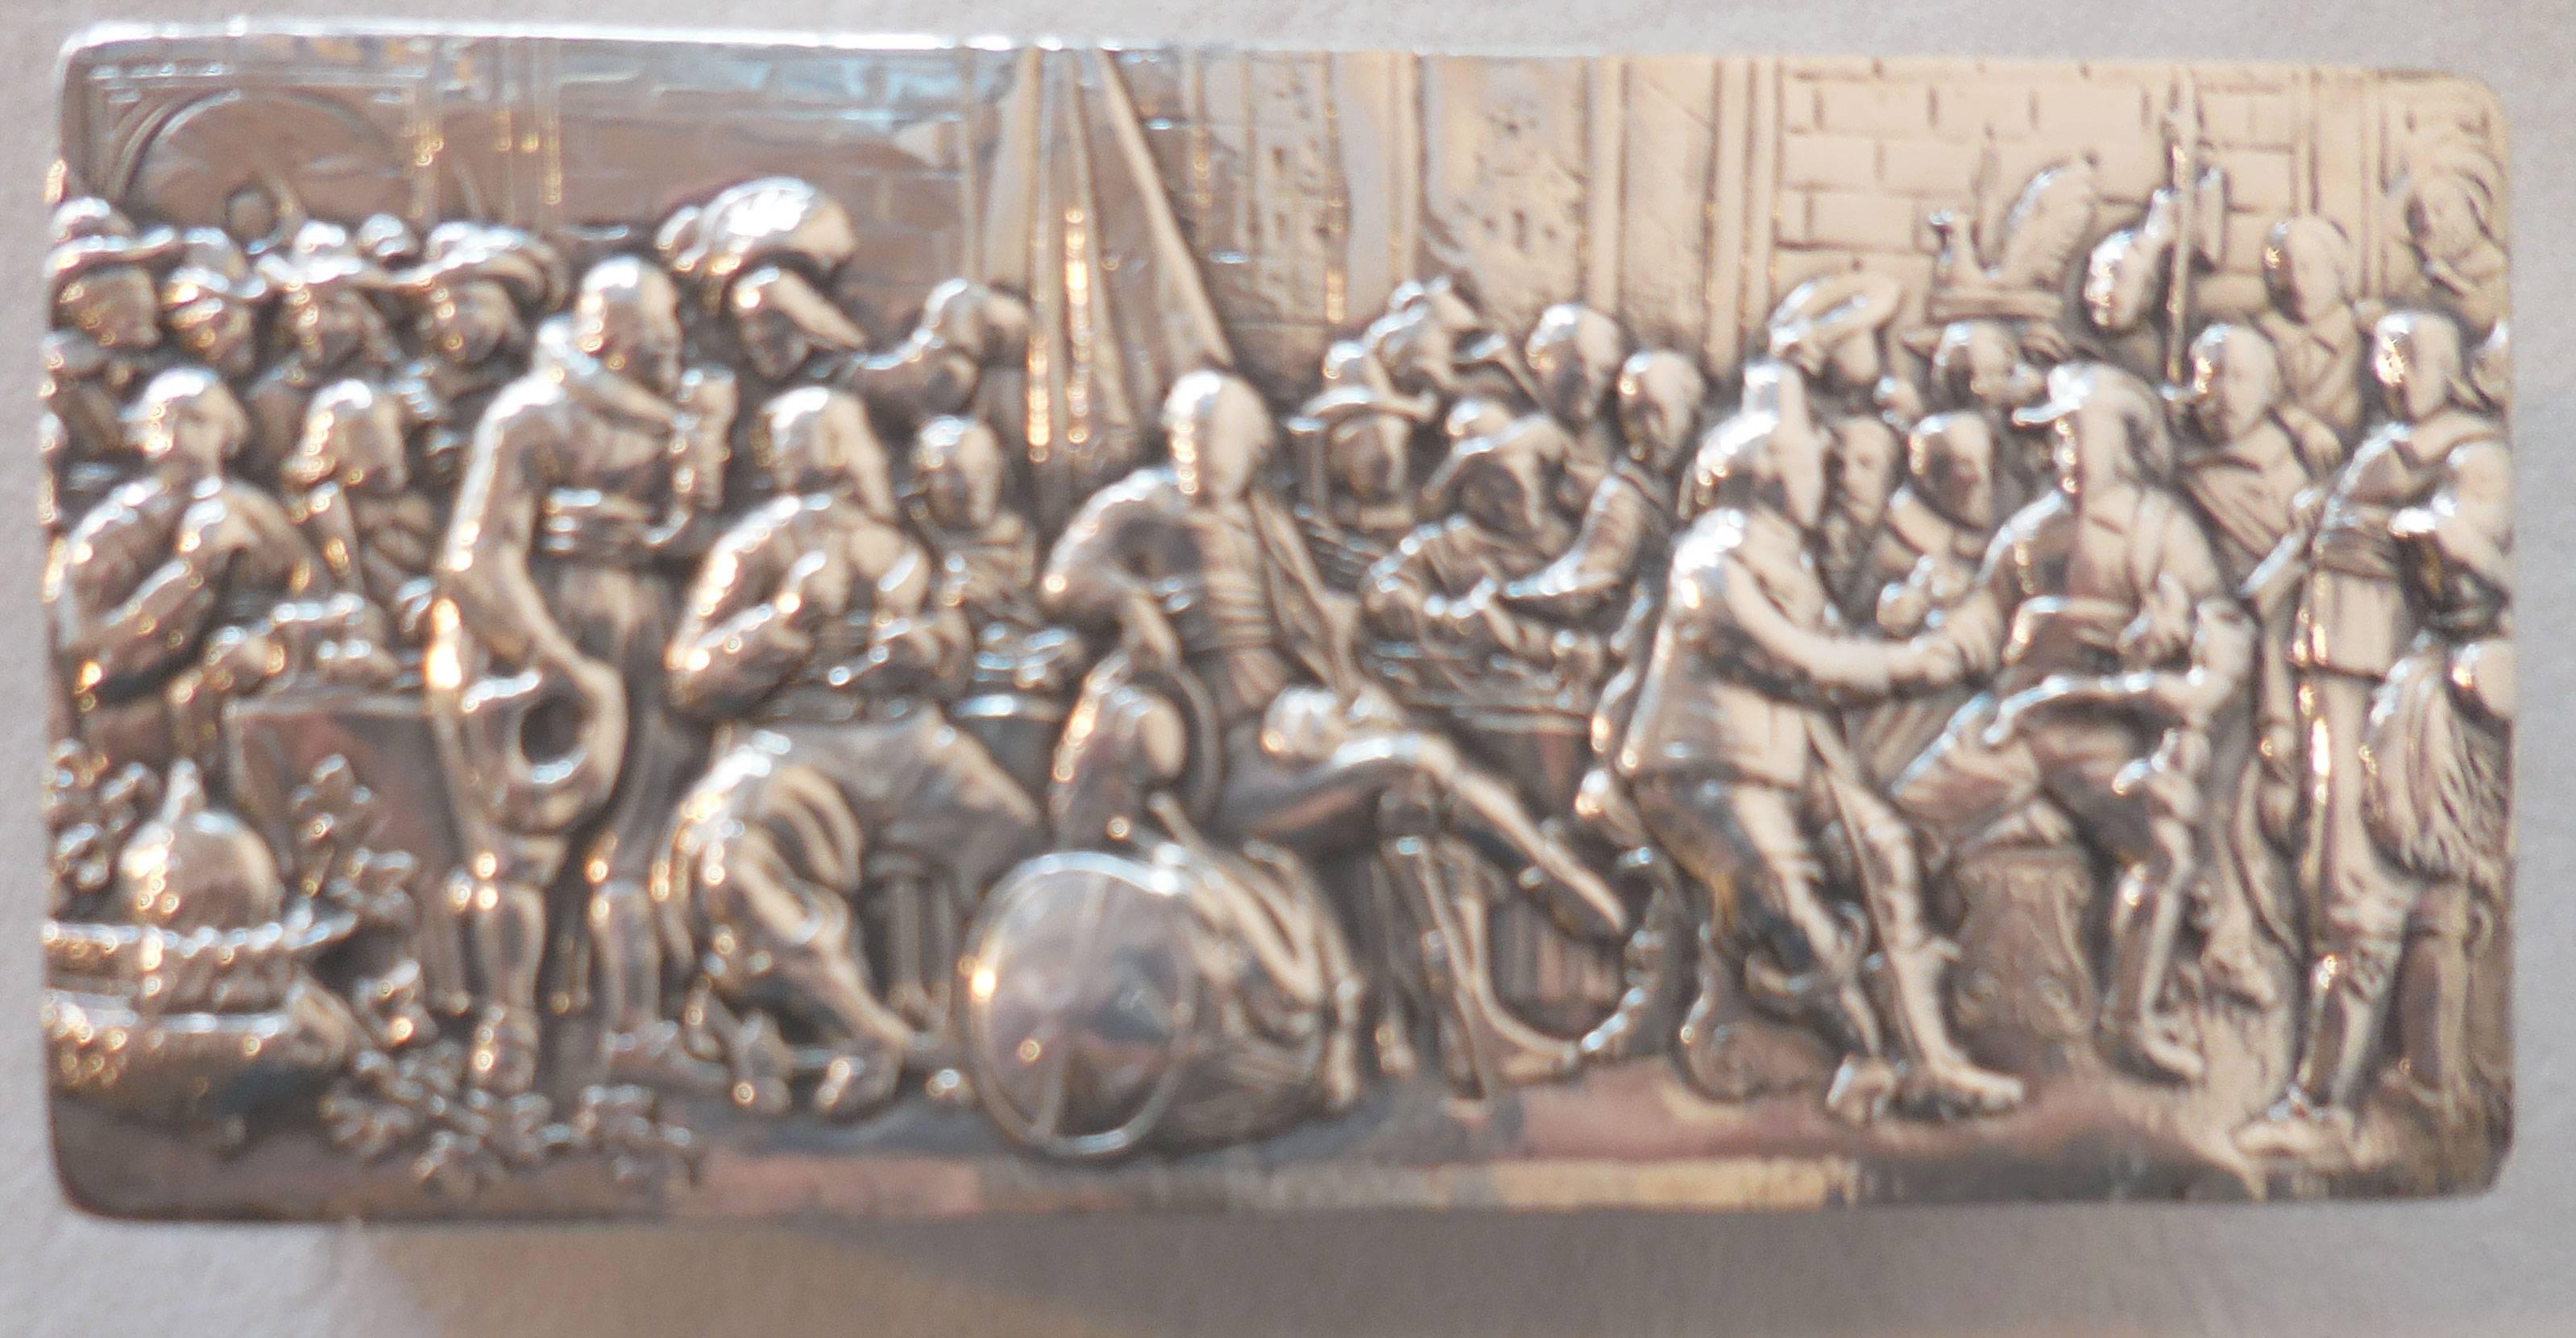 Antique Dutch repoussé silver trinket box raised on bun feet, the hinged cover depicting a genre scene, celebrating the Peace of Munster, after the original by Bartholomeus van der Helst. The four sides are embossed with scrolled cartouches